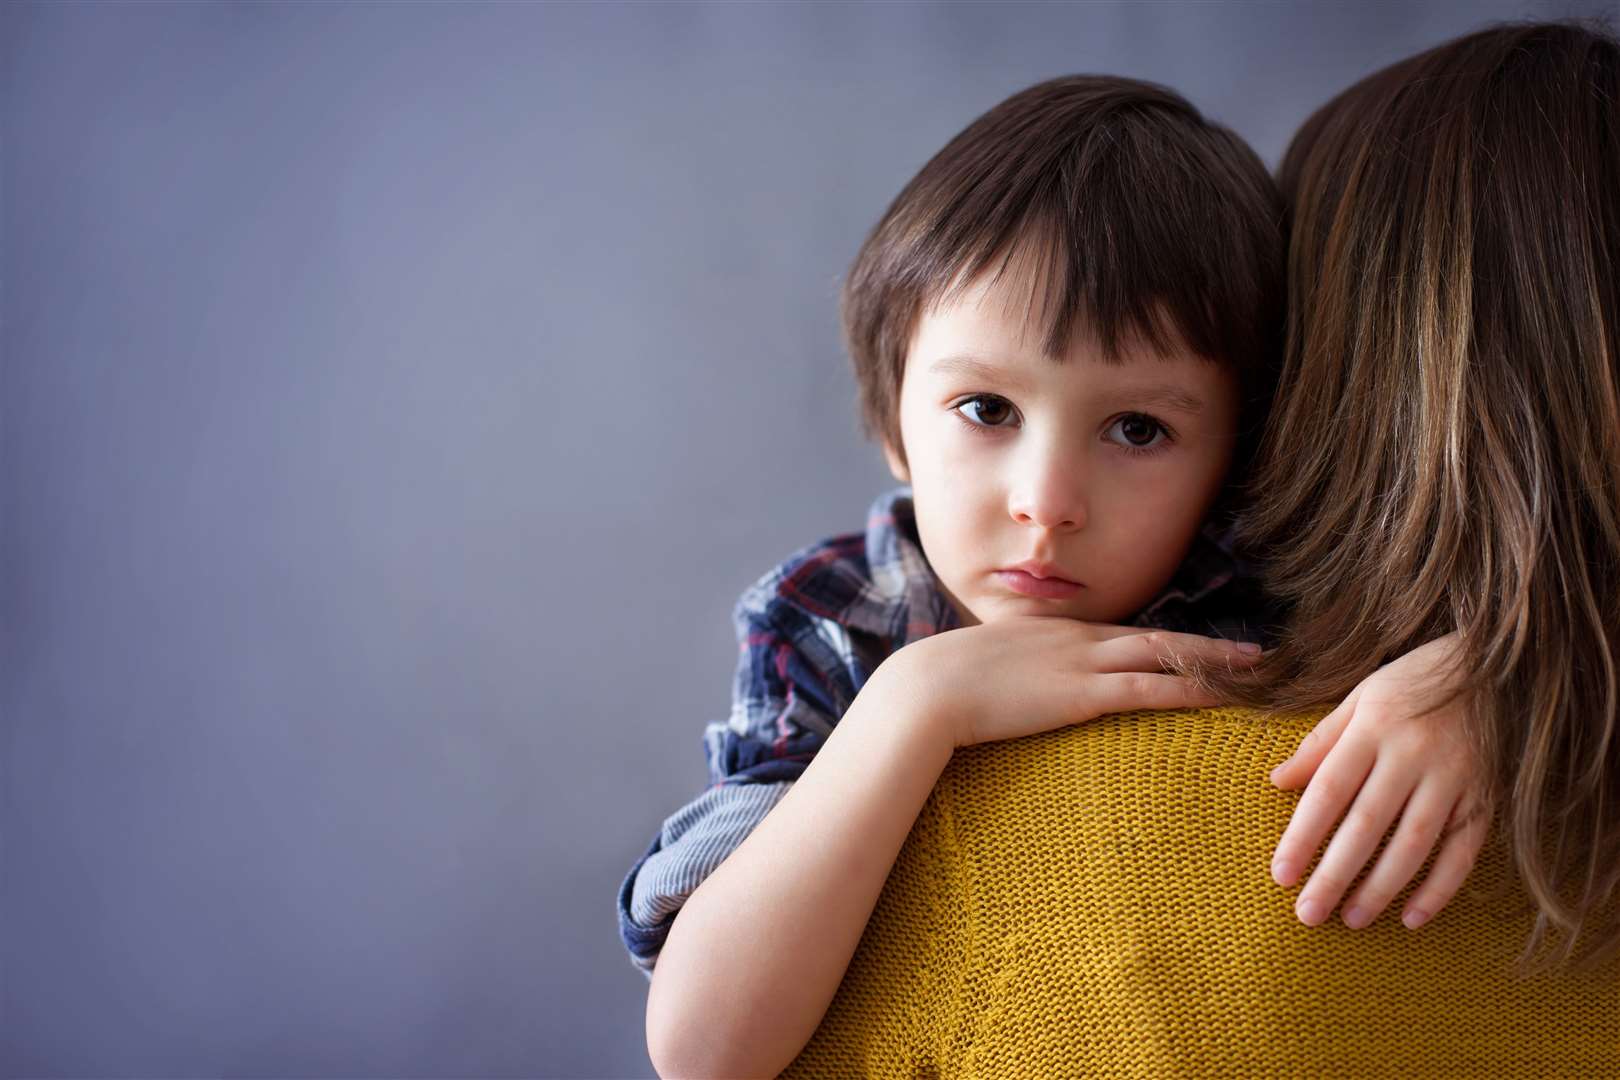 Parents in England should not smack their children except where this may amount to 'reasonable punishment' says the law. Photo: Stock image.